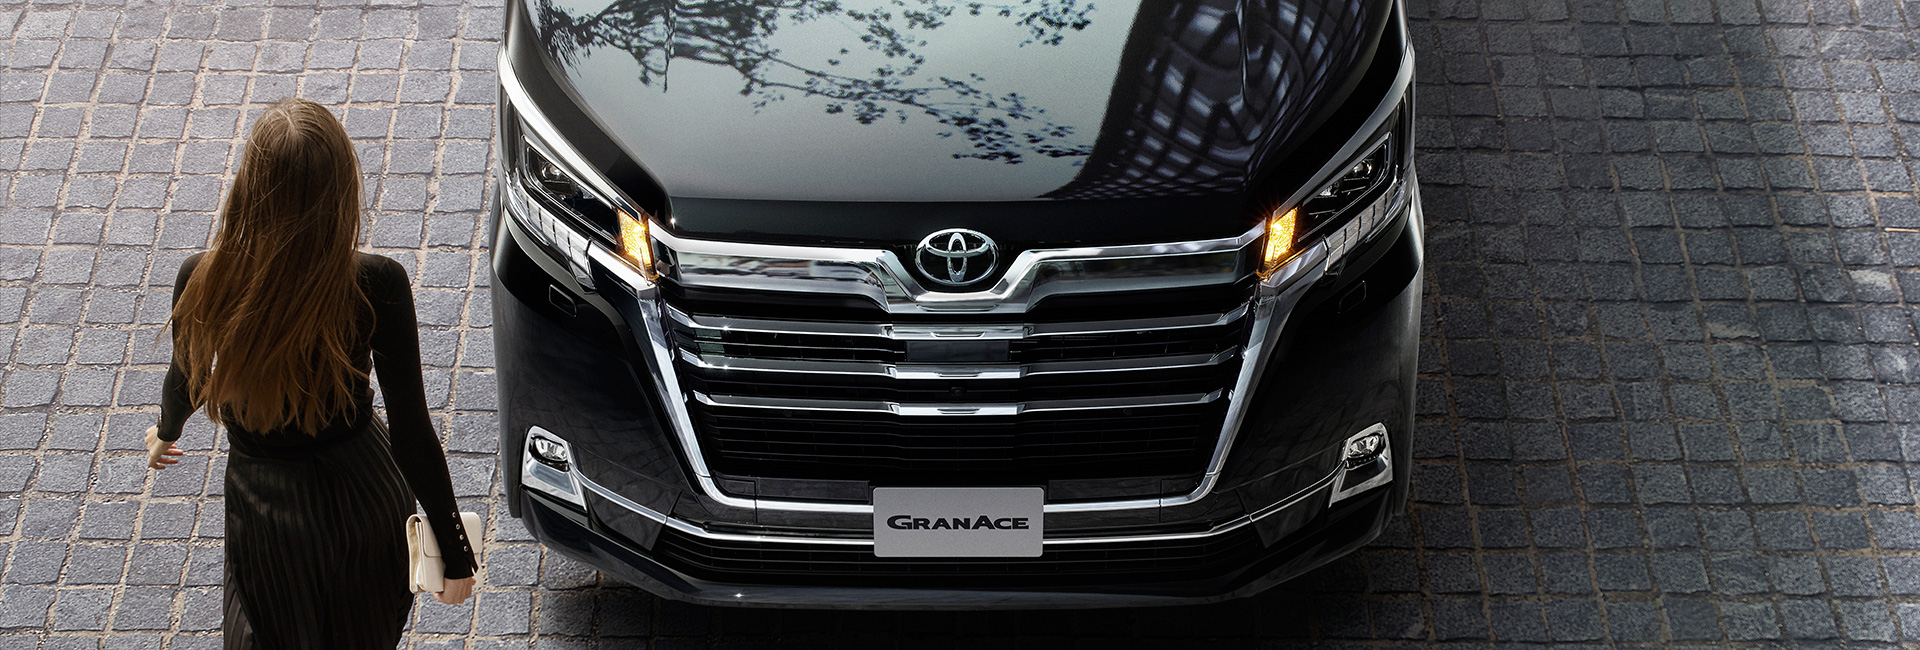 Toyota to Launch New Model "Granace" in JapanSales of large luxury wagon to start from December 16 - Image 4